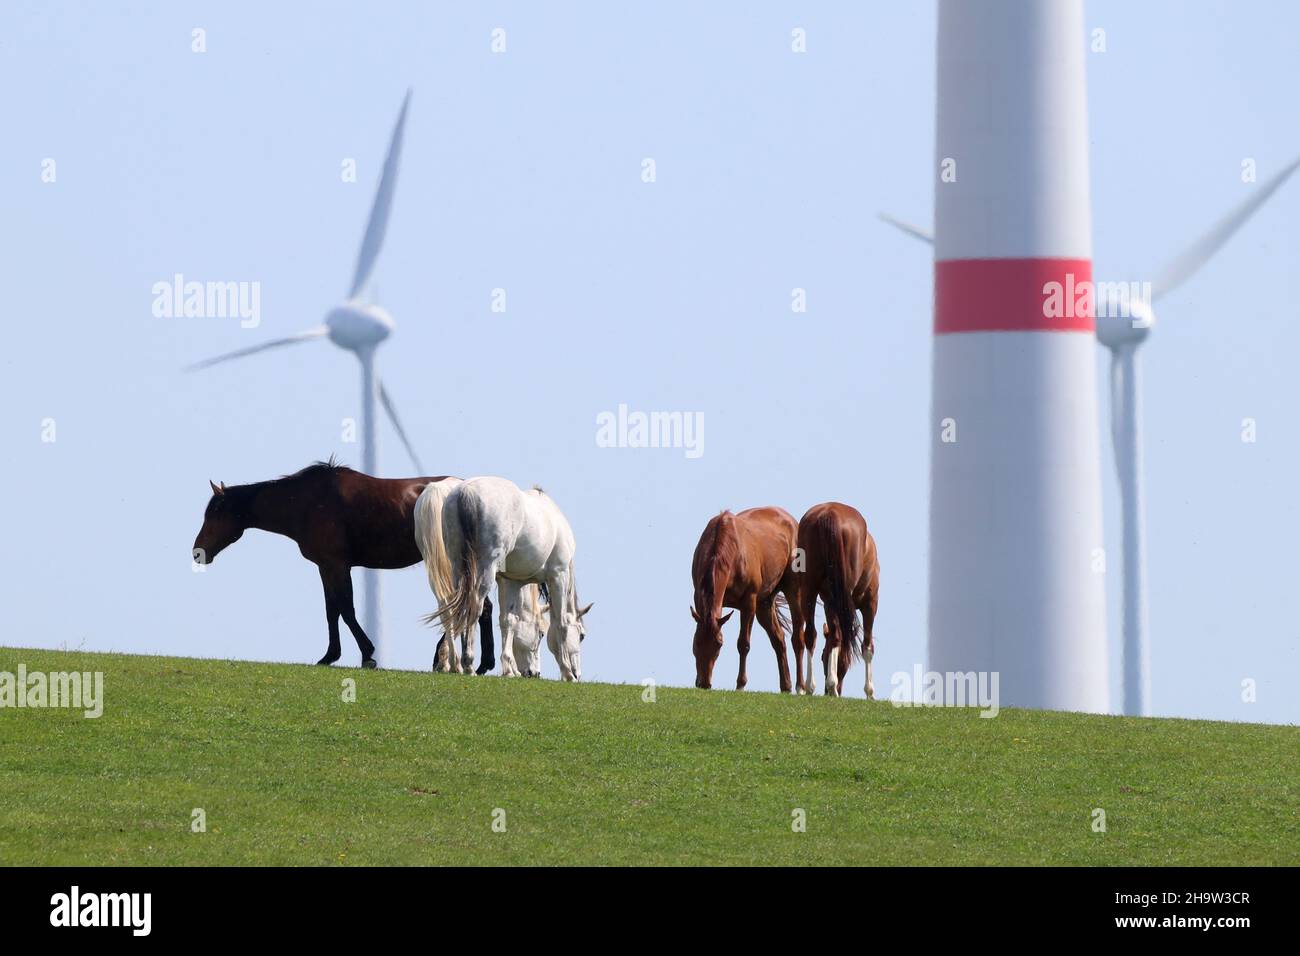 11 Wind Turbines High Resolution Stock Photography and Images - Alamy